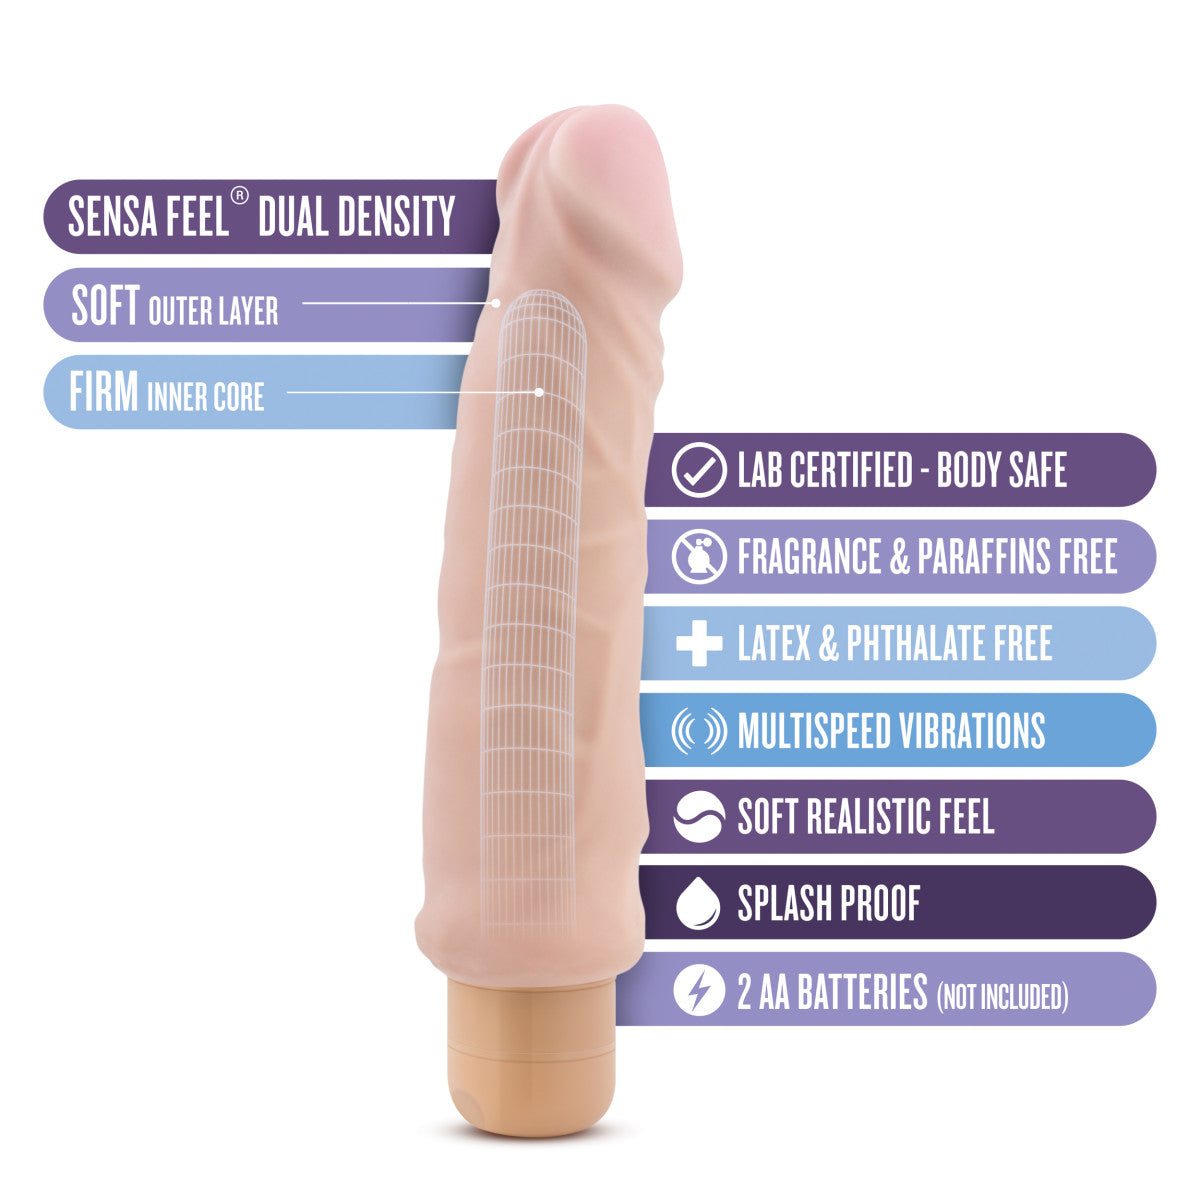 Ultra realistic, vanilla skin tone vibrating dildo with a defined head and subtle veins along the shaft. Long shaft with a very slight curve. Twist dial on bottom to adjust intensity.  Additional images show alternate angles.